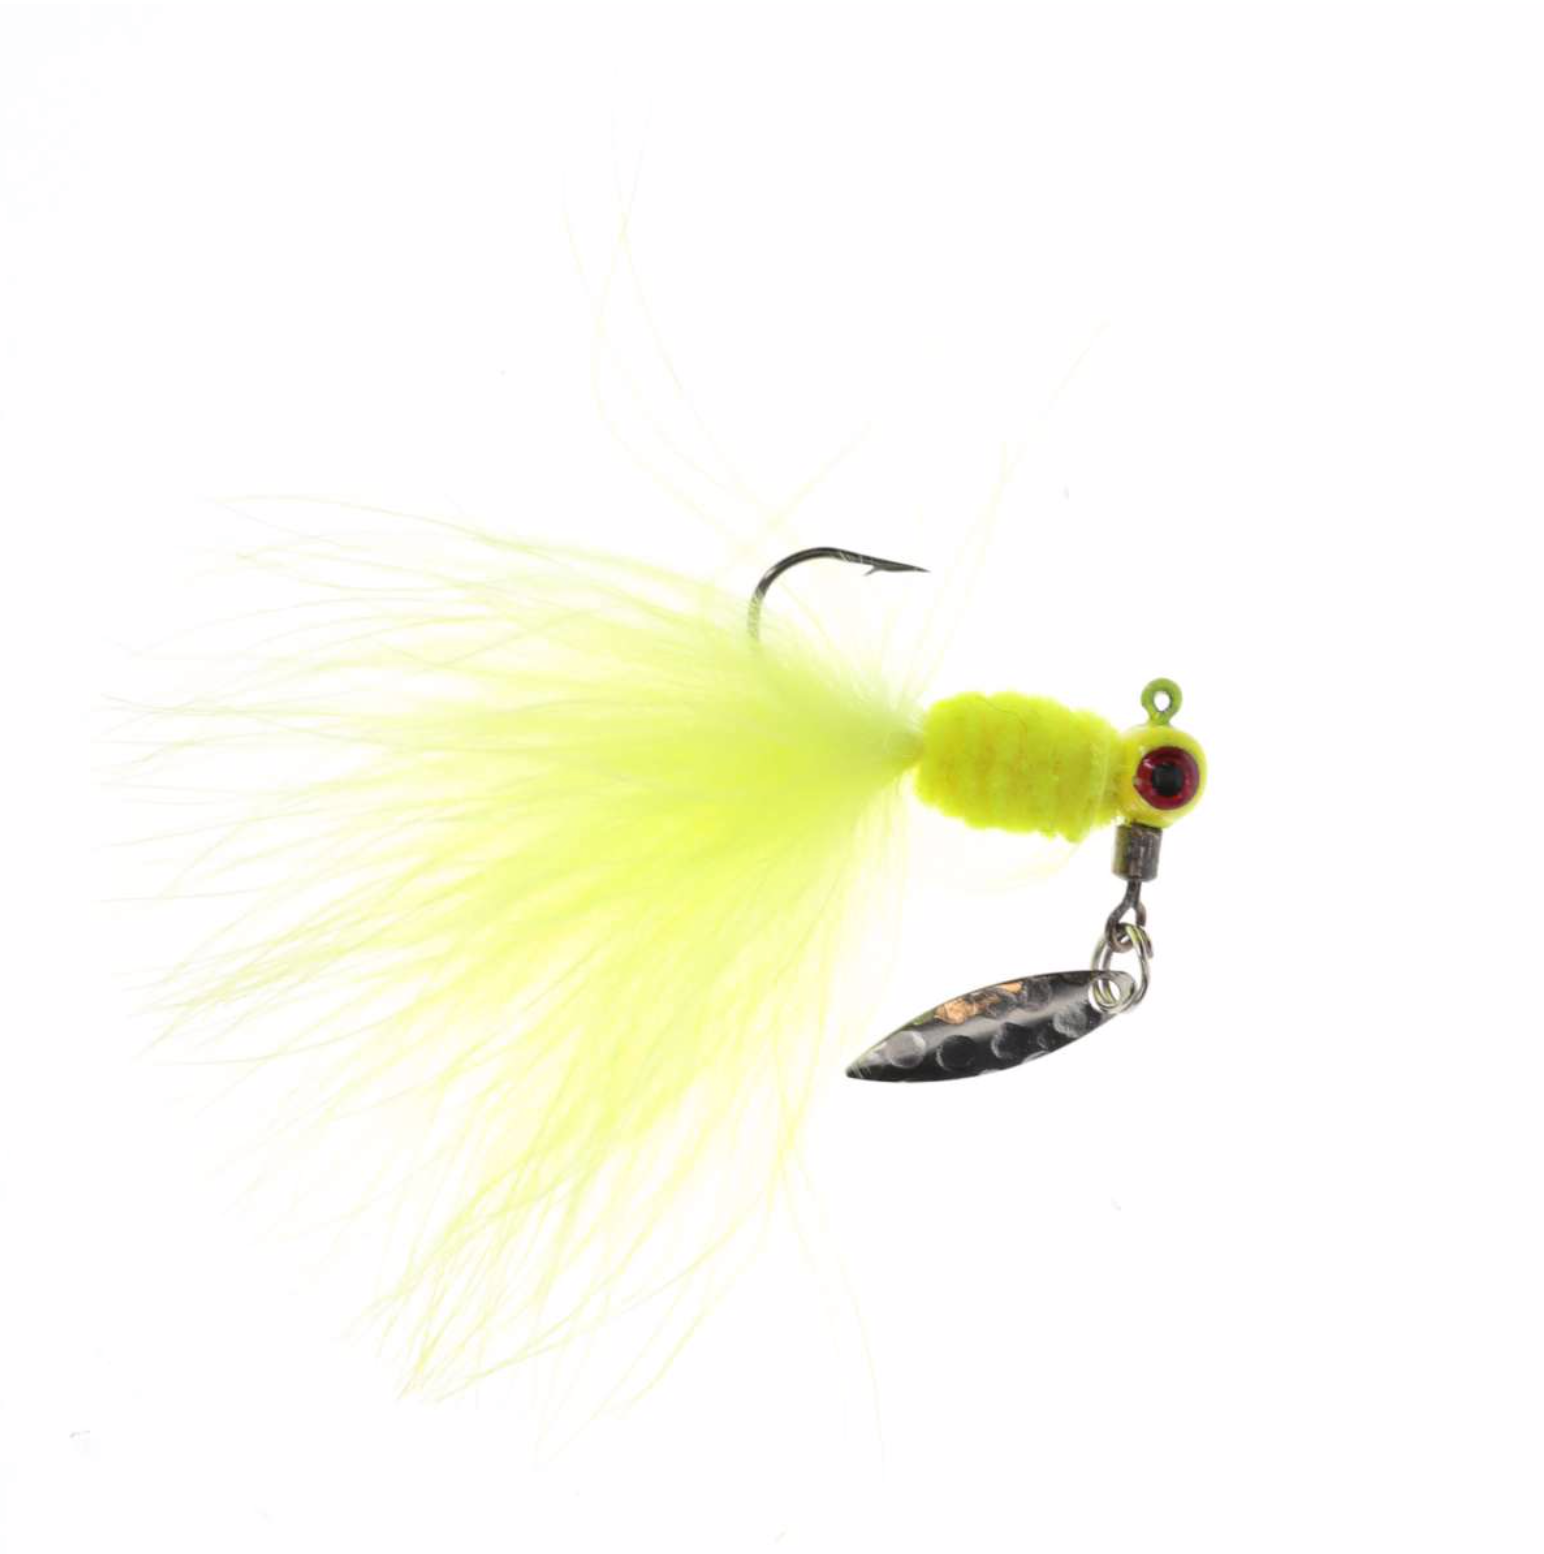  Crappie-Jig-Heads-Kit-with-Underspin-Jig-Head-Spinner-Blade